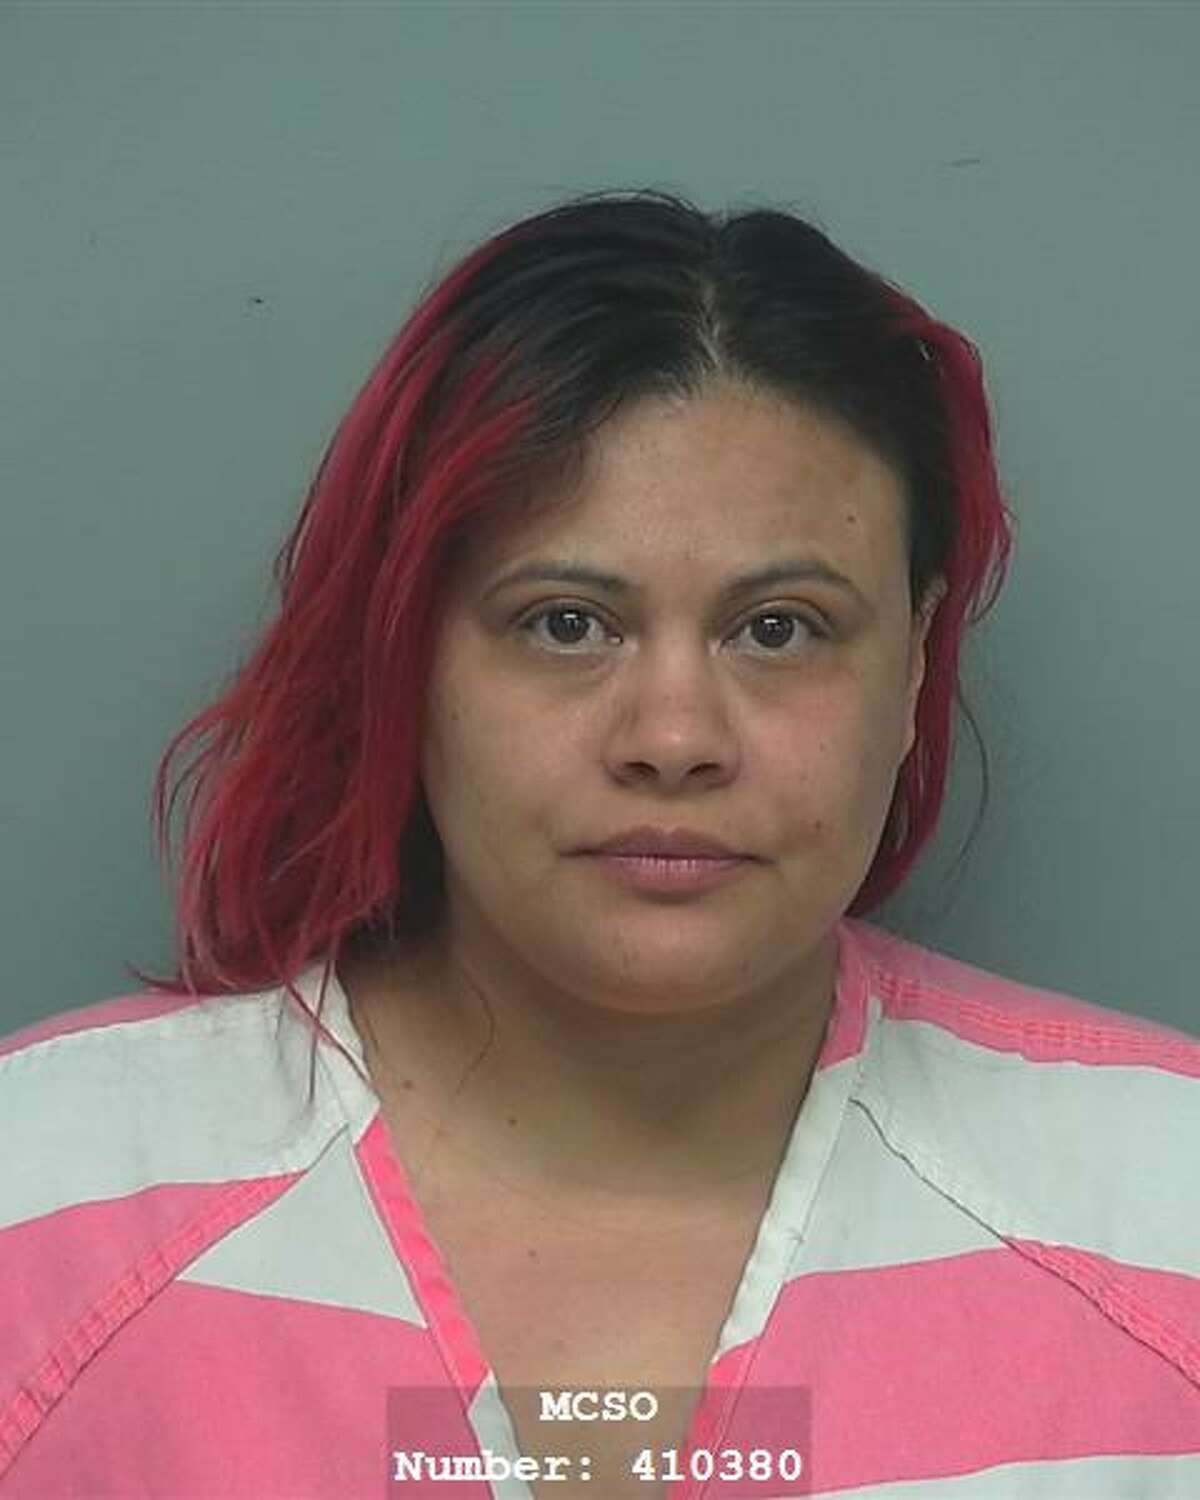 Vivian Acuna, 36, of Houston, is being charged with harassment of a public servant, assault on a public servant, evading arrest with a vehicle, resisting arrest, search and transport and a DWI.